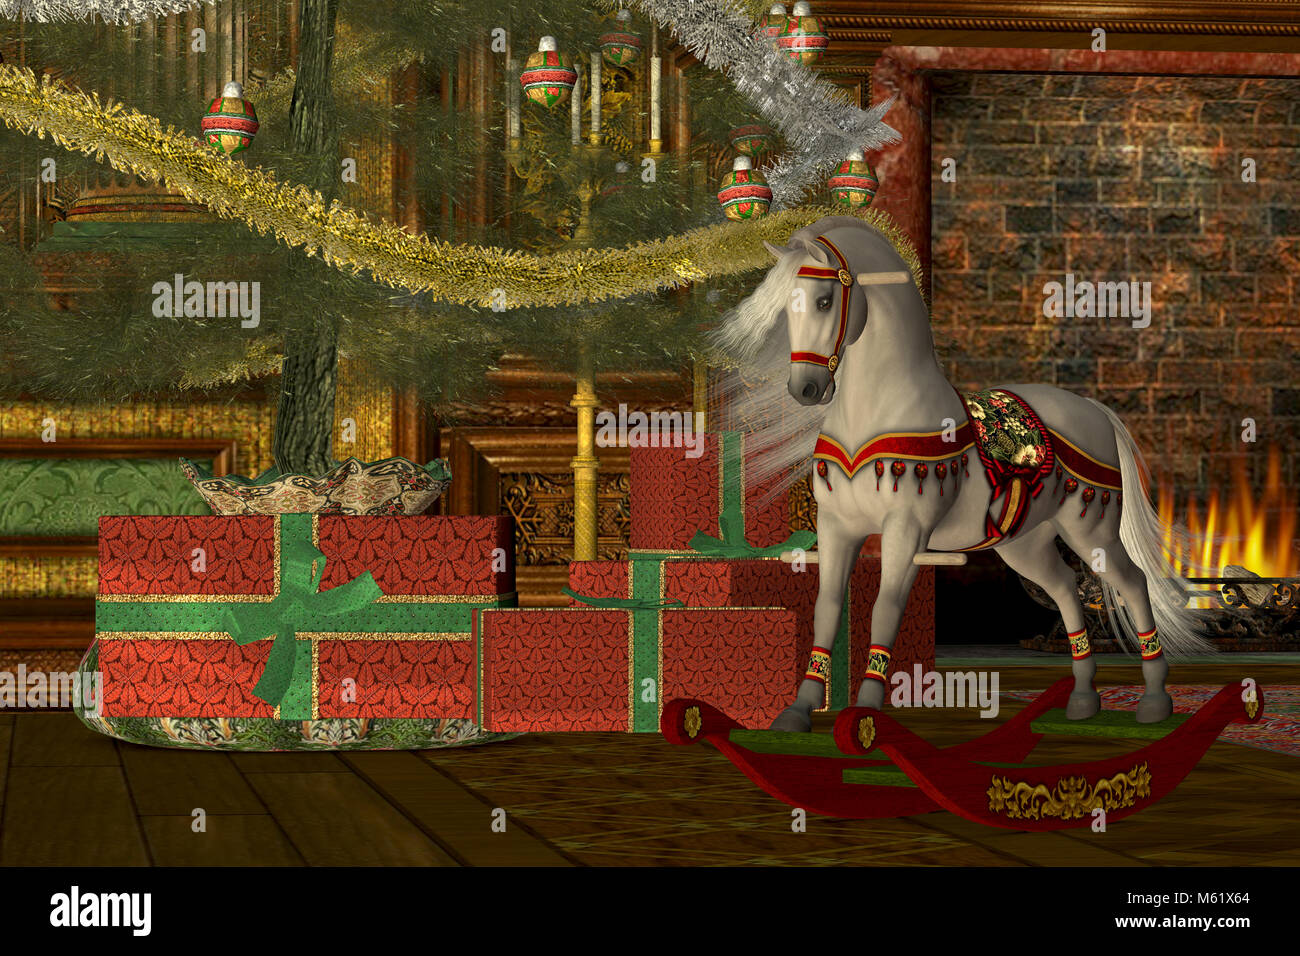 A rocking horse awaits its new rider on Christmas morning under the decorated tree in front of a Victorian fireplace. Stock Photo